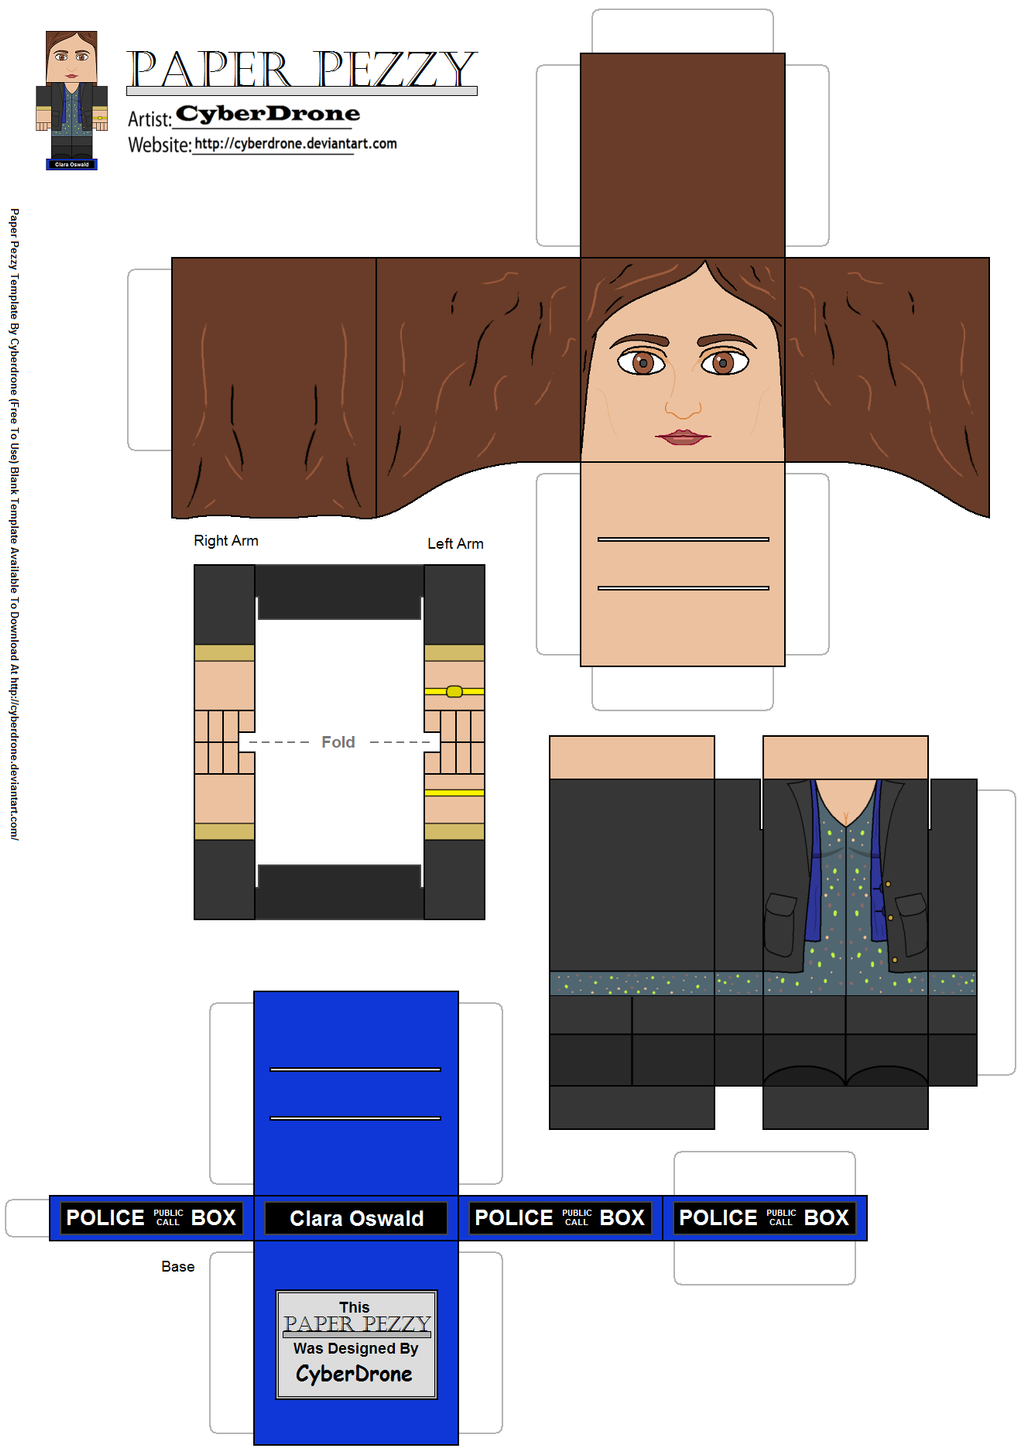 Paper Pezzy- Clara Oswald by CyberDrone on DeviantArt